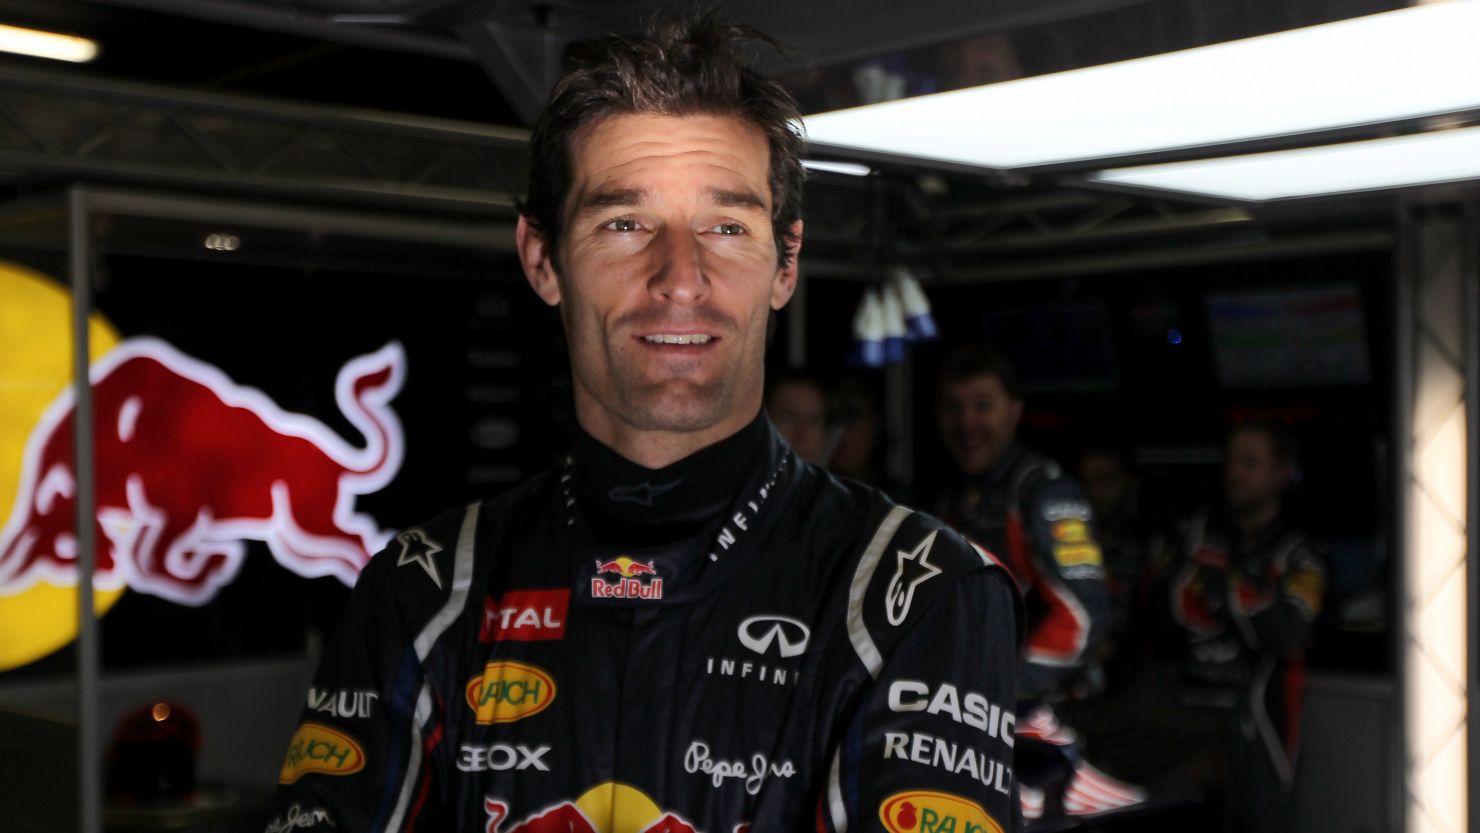 Australian driver Mark Webber has been with the Britain-based Red Bull team for five seasons.